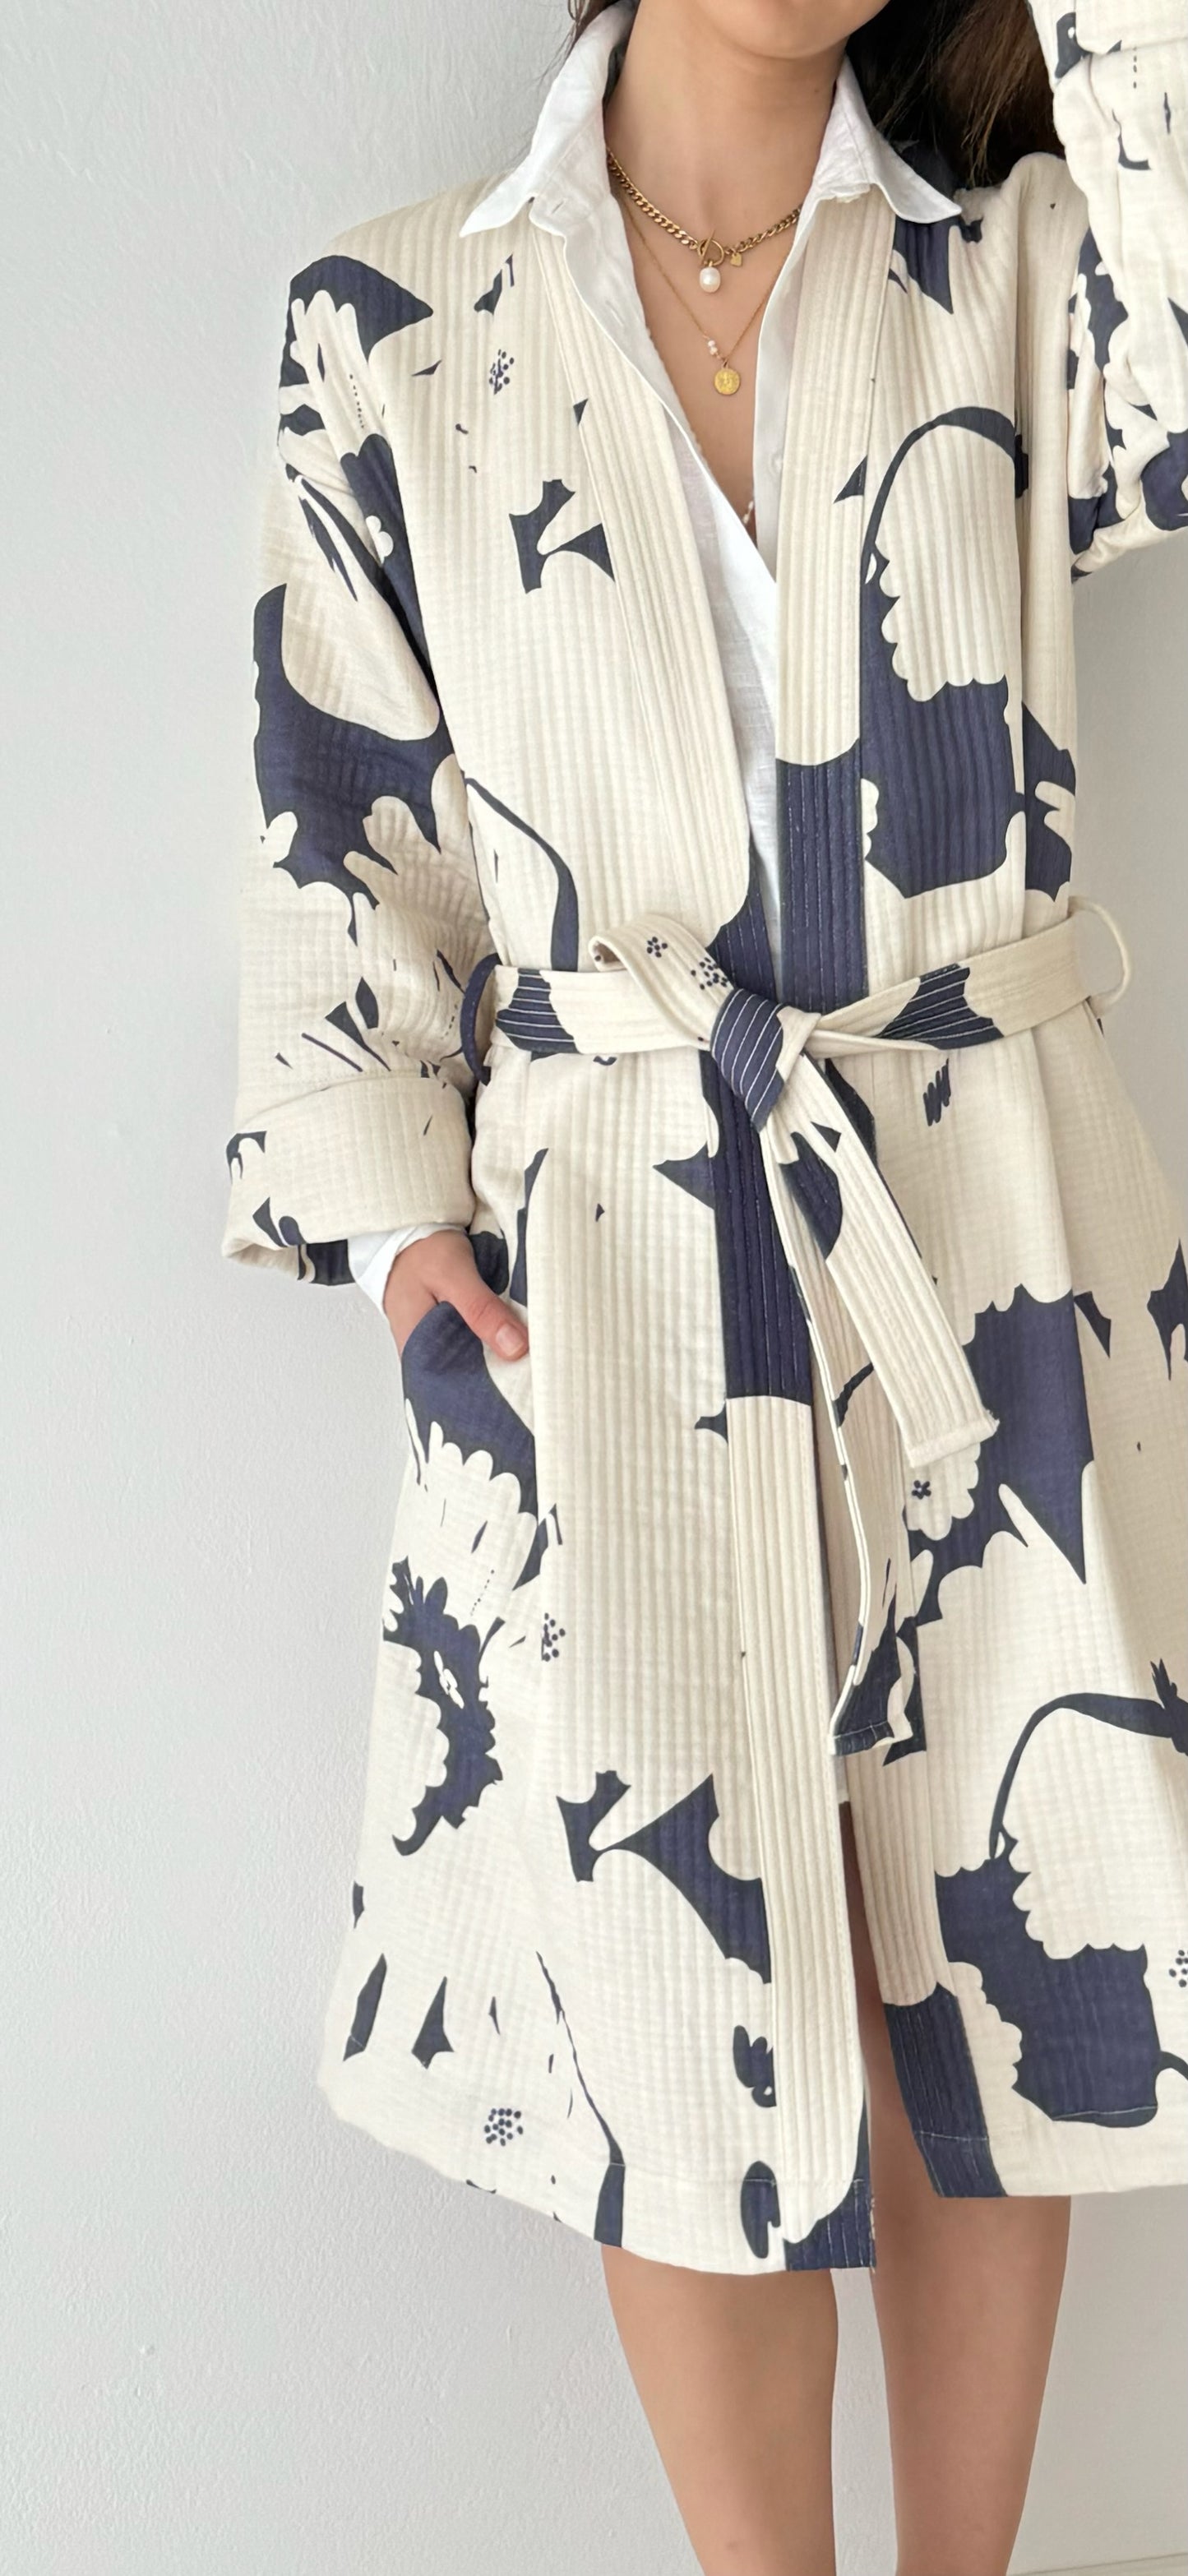 Denim and off white kimono - 100% cotton with contemporary pattern in denim and off white tones, as a bathrobe, home robe or jacket